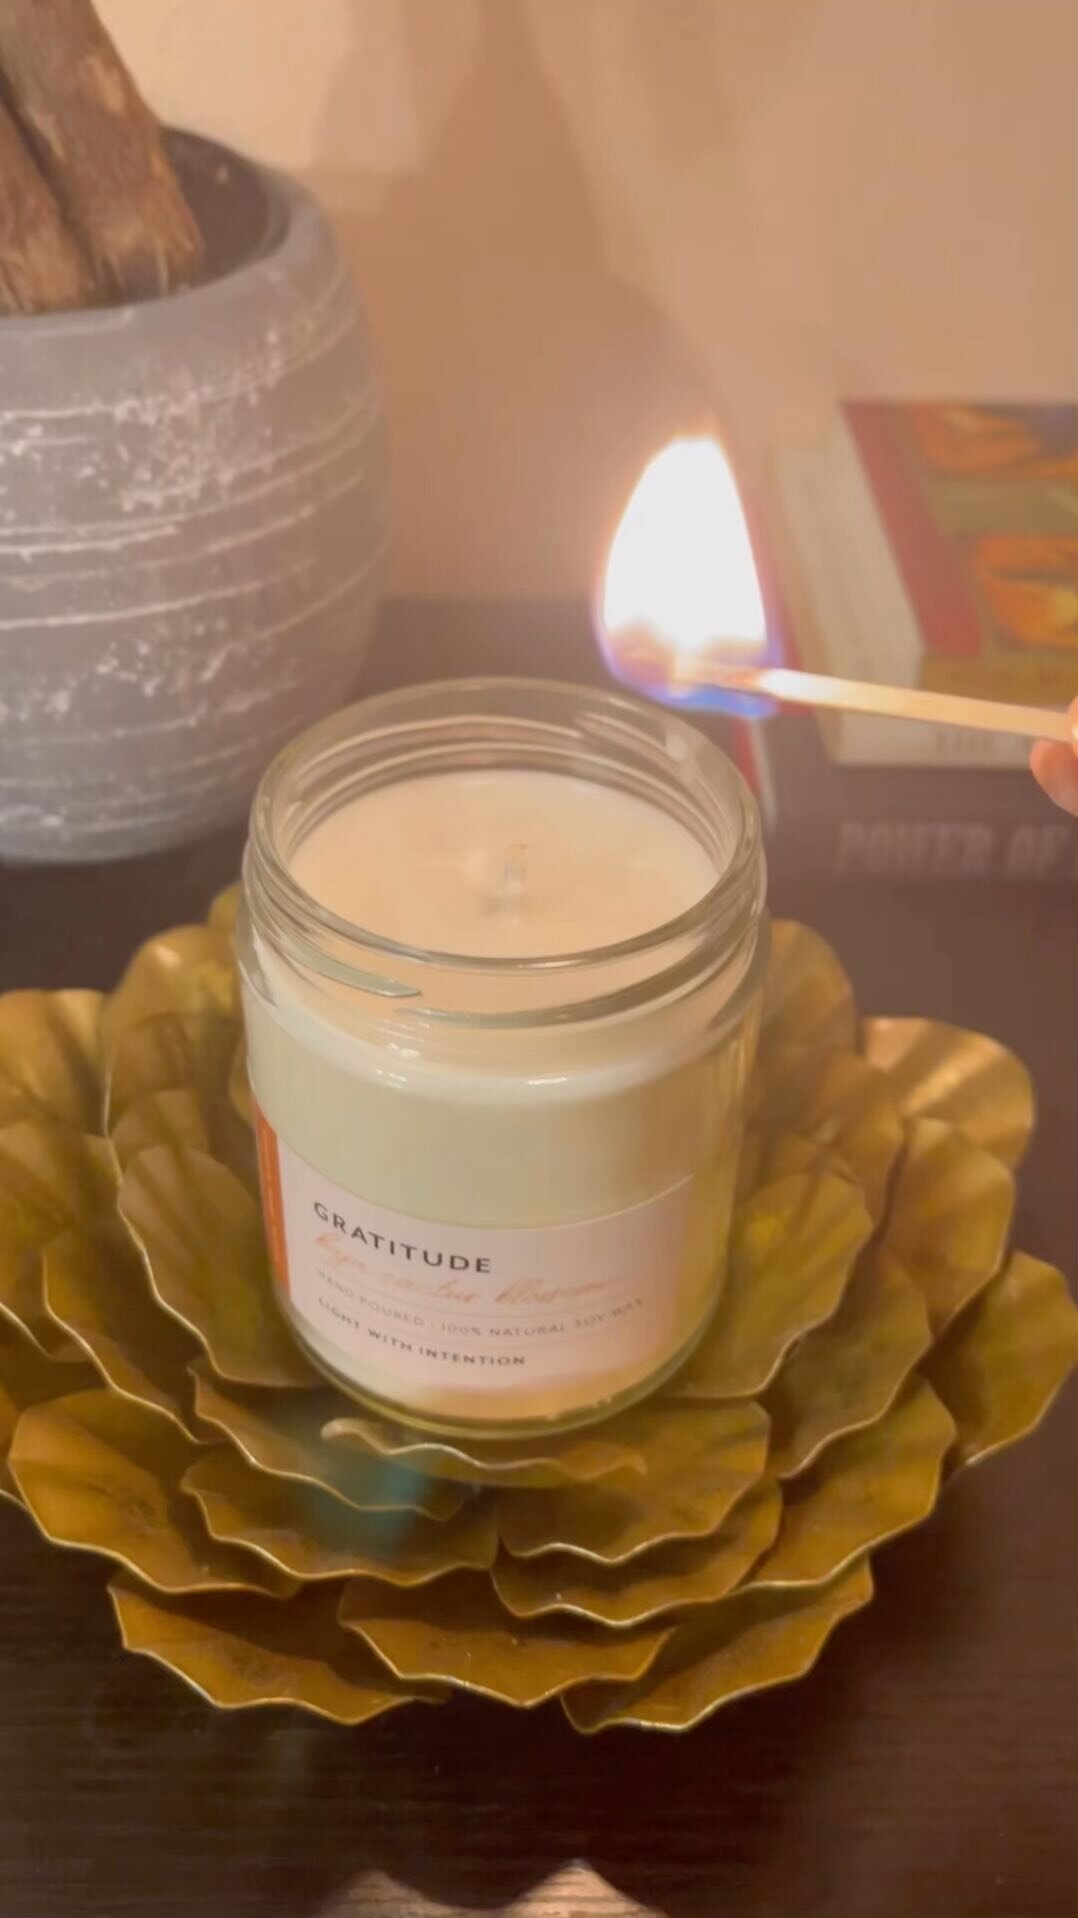 Handmade Candles for mindfulness | Blossom Candle Co.